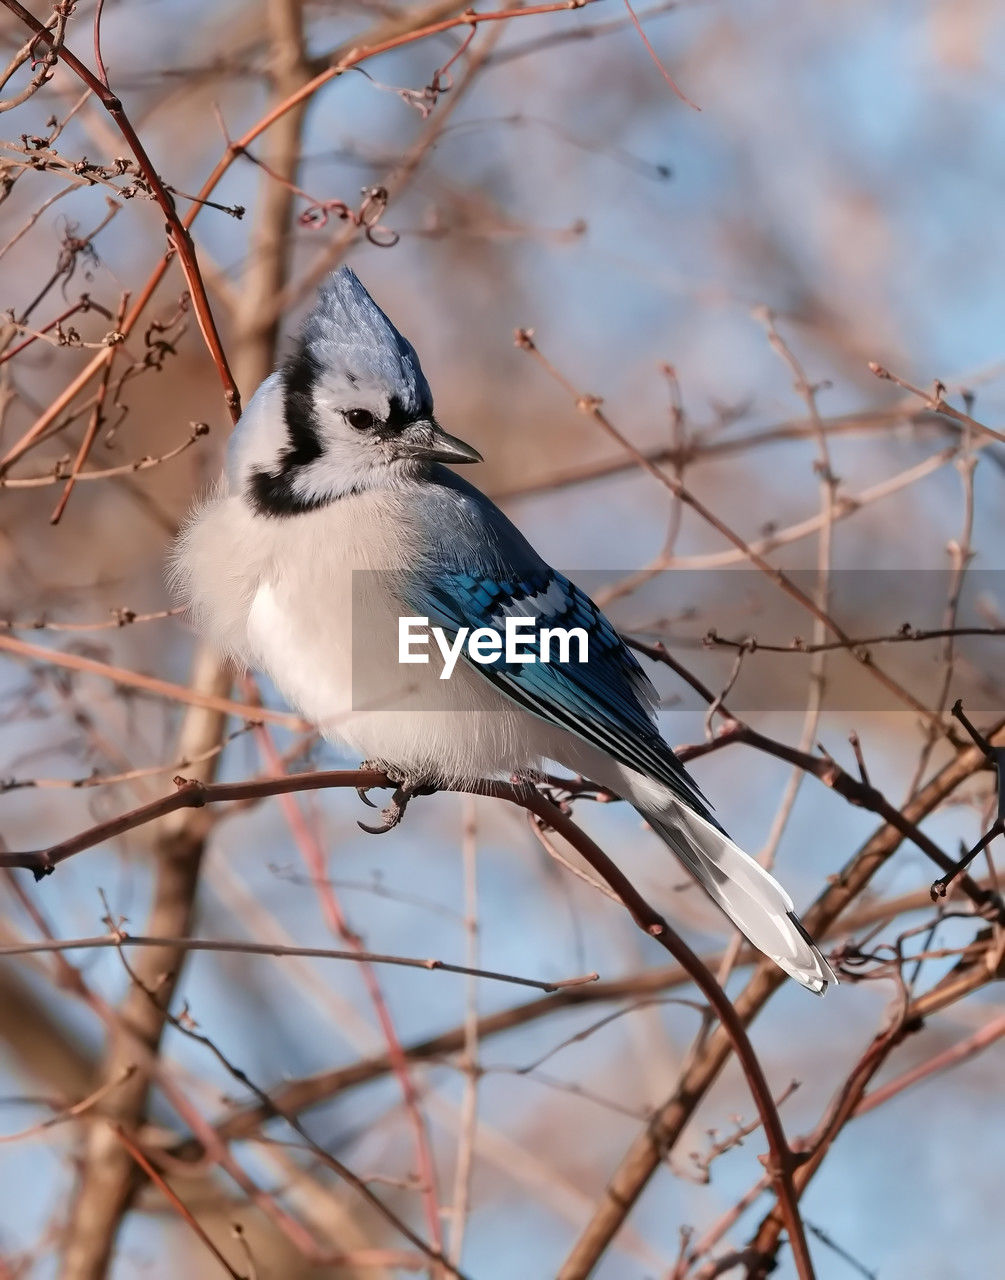 Bluejay in a tree